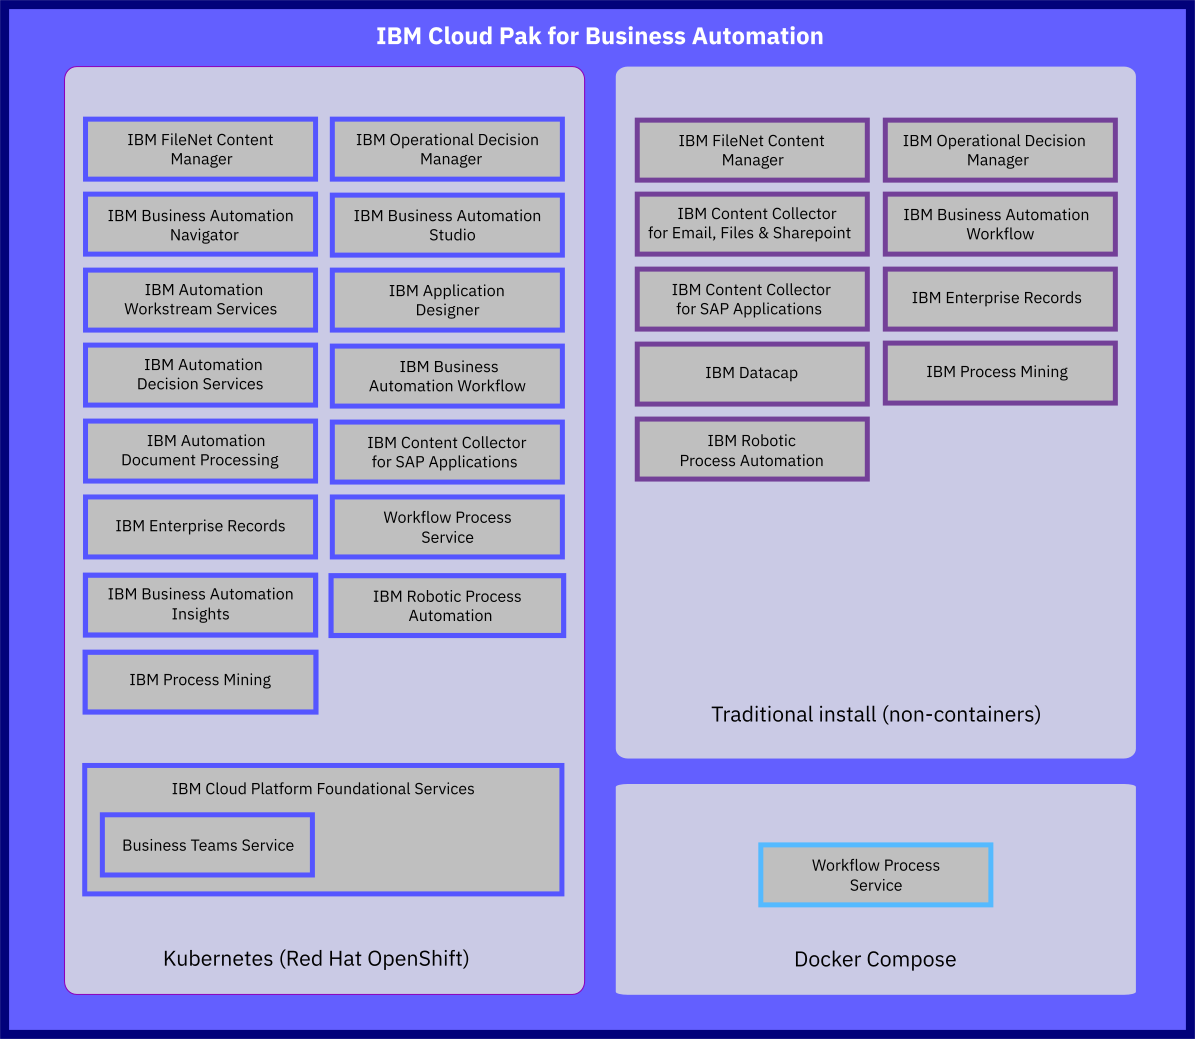 Image shows the main components in Cloud Pak for Business Automation 22.0.1.